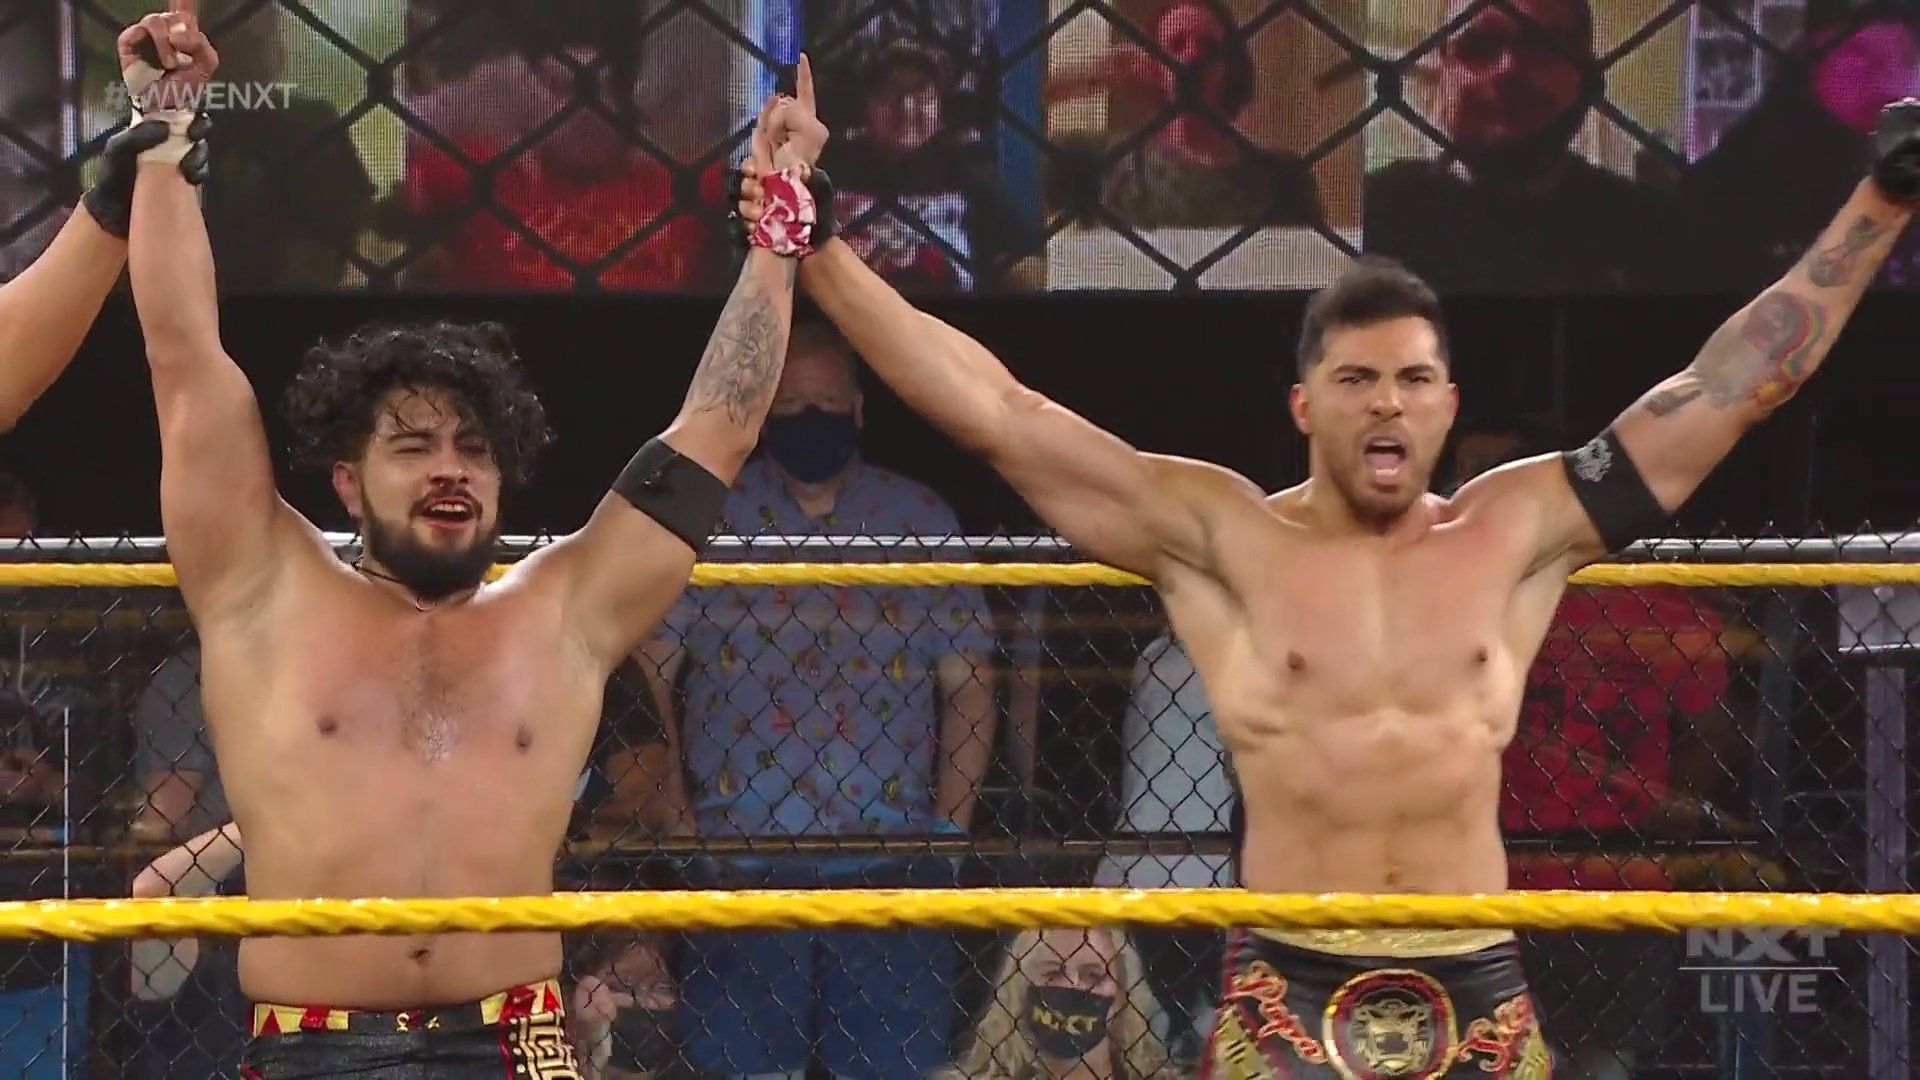 Legado Del Fantasma celebrate their victory over Ciampa and Thatcher on NXT